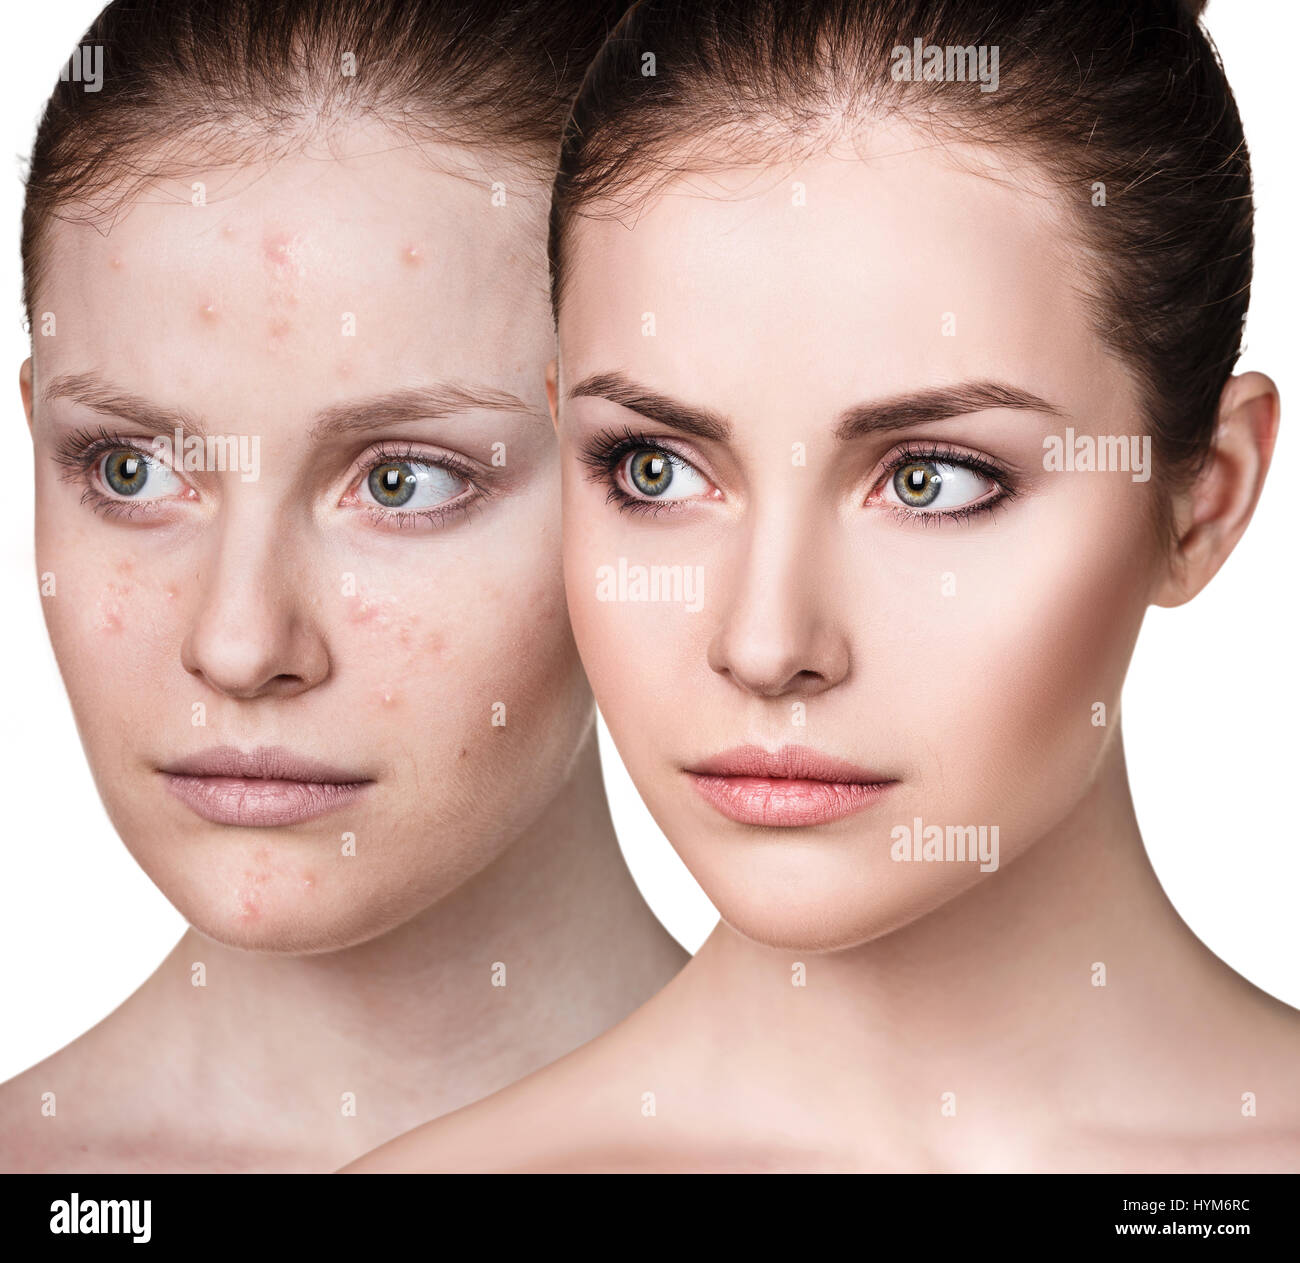 Girl with acne before and after treatment. Stock Photo